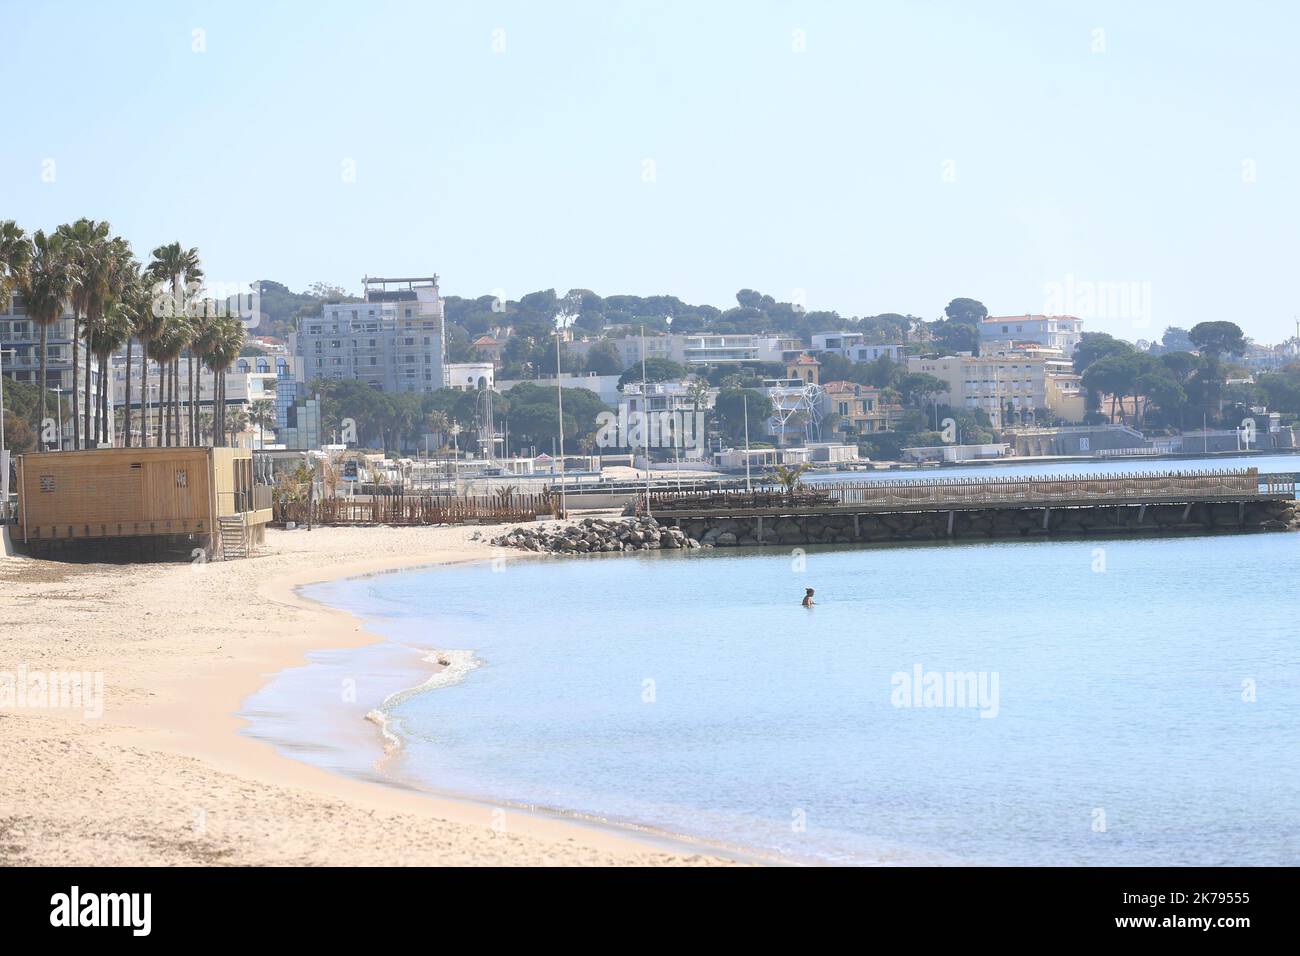 A general view of people on the French Riviera beach despite a ban on access to the beaches of Golfe-Juan Vallauris being introduced due to the Coronavirus epidemic Stock Photo